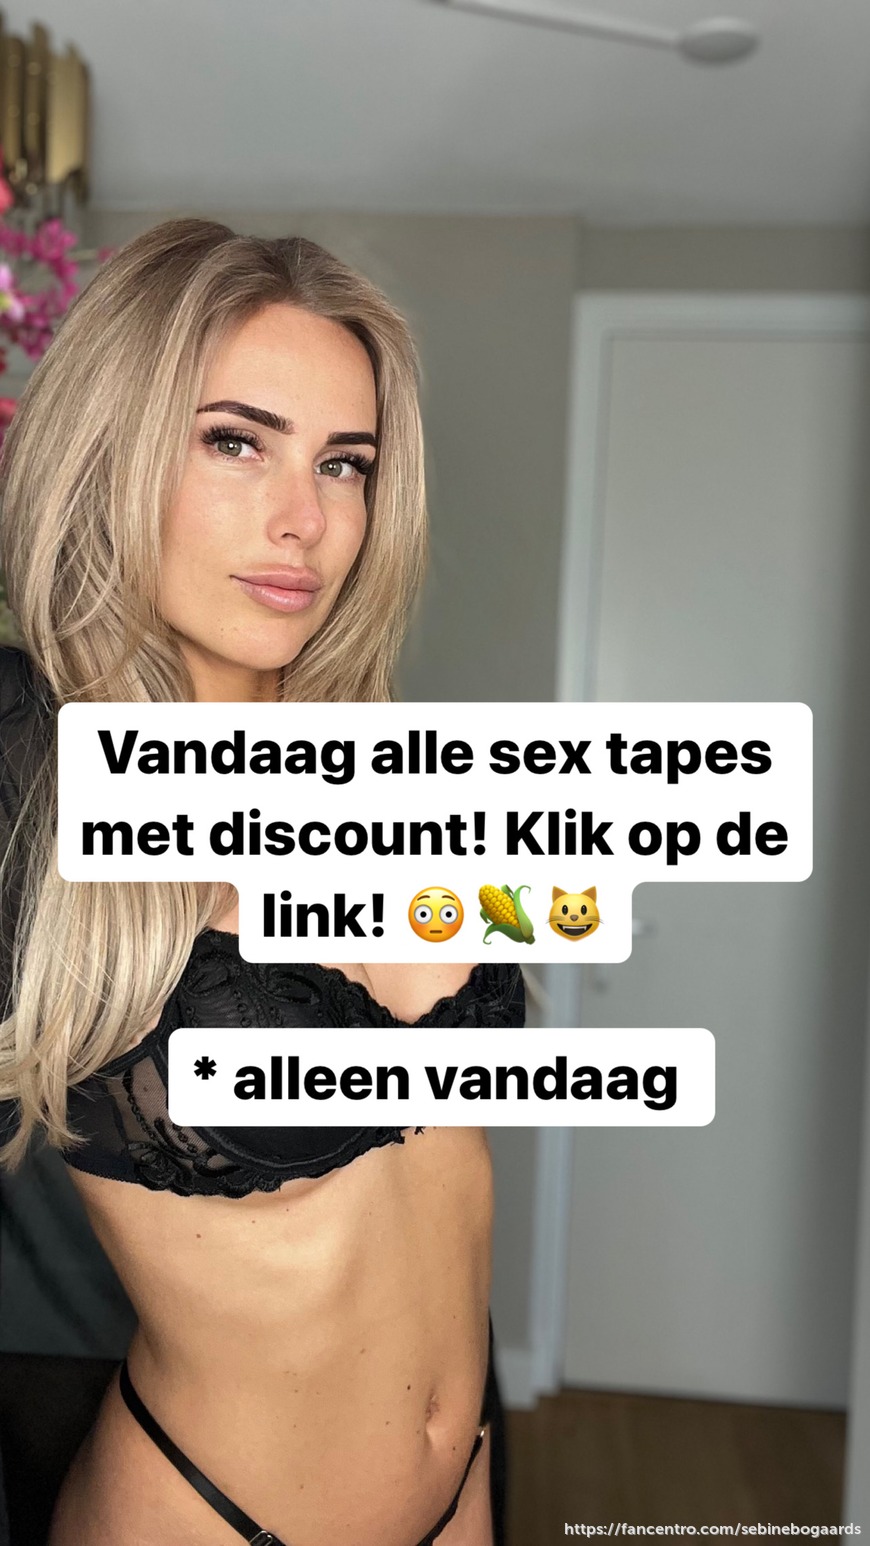 ALLE SEX TAPES 😳🔞👇🏼